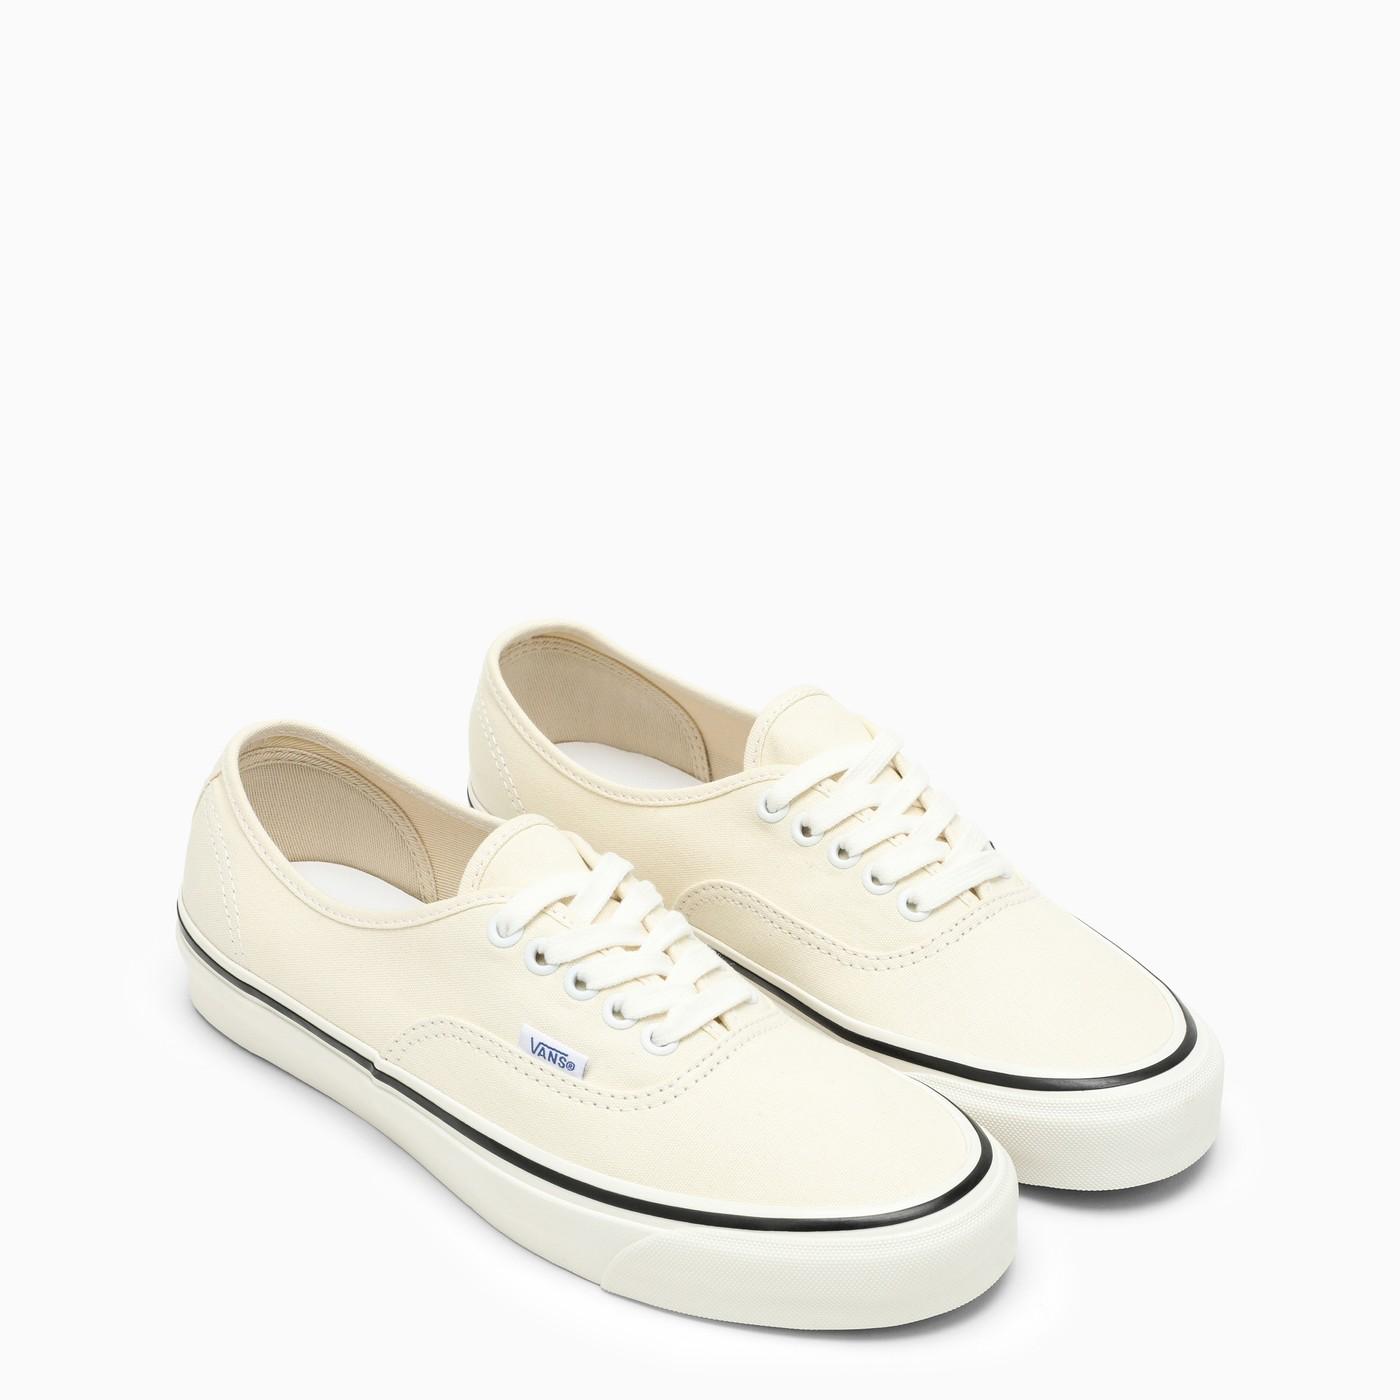 Vans Authentic 44 Low Trainer in White | Lyst